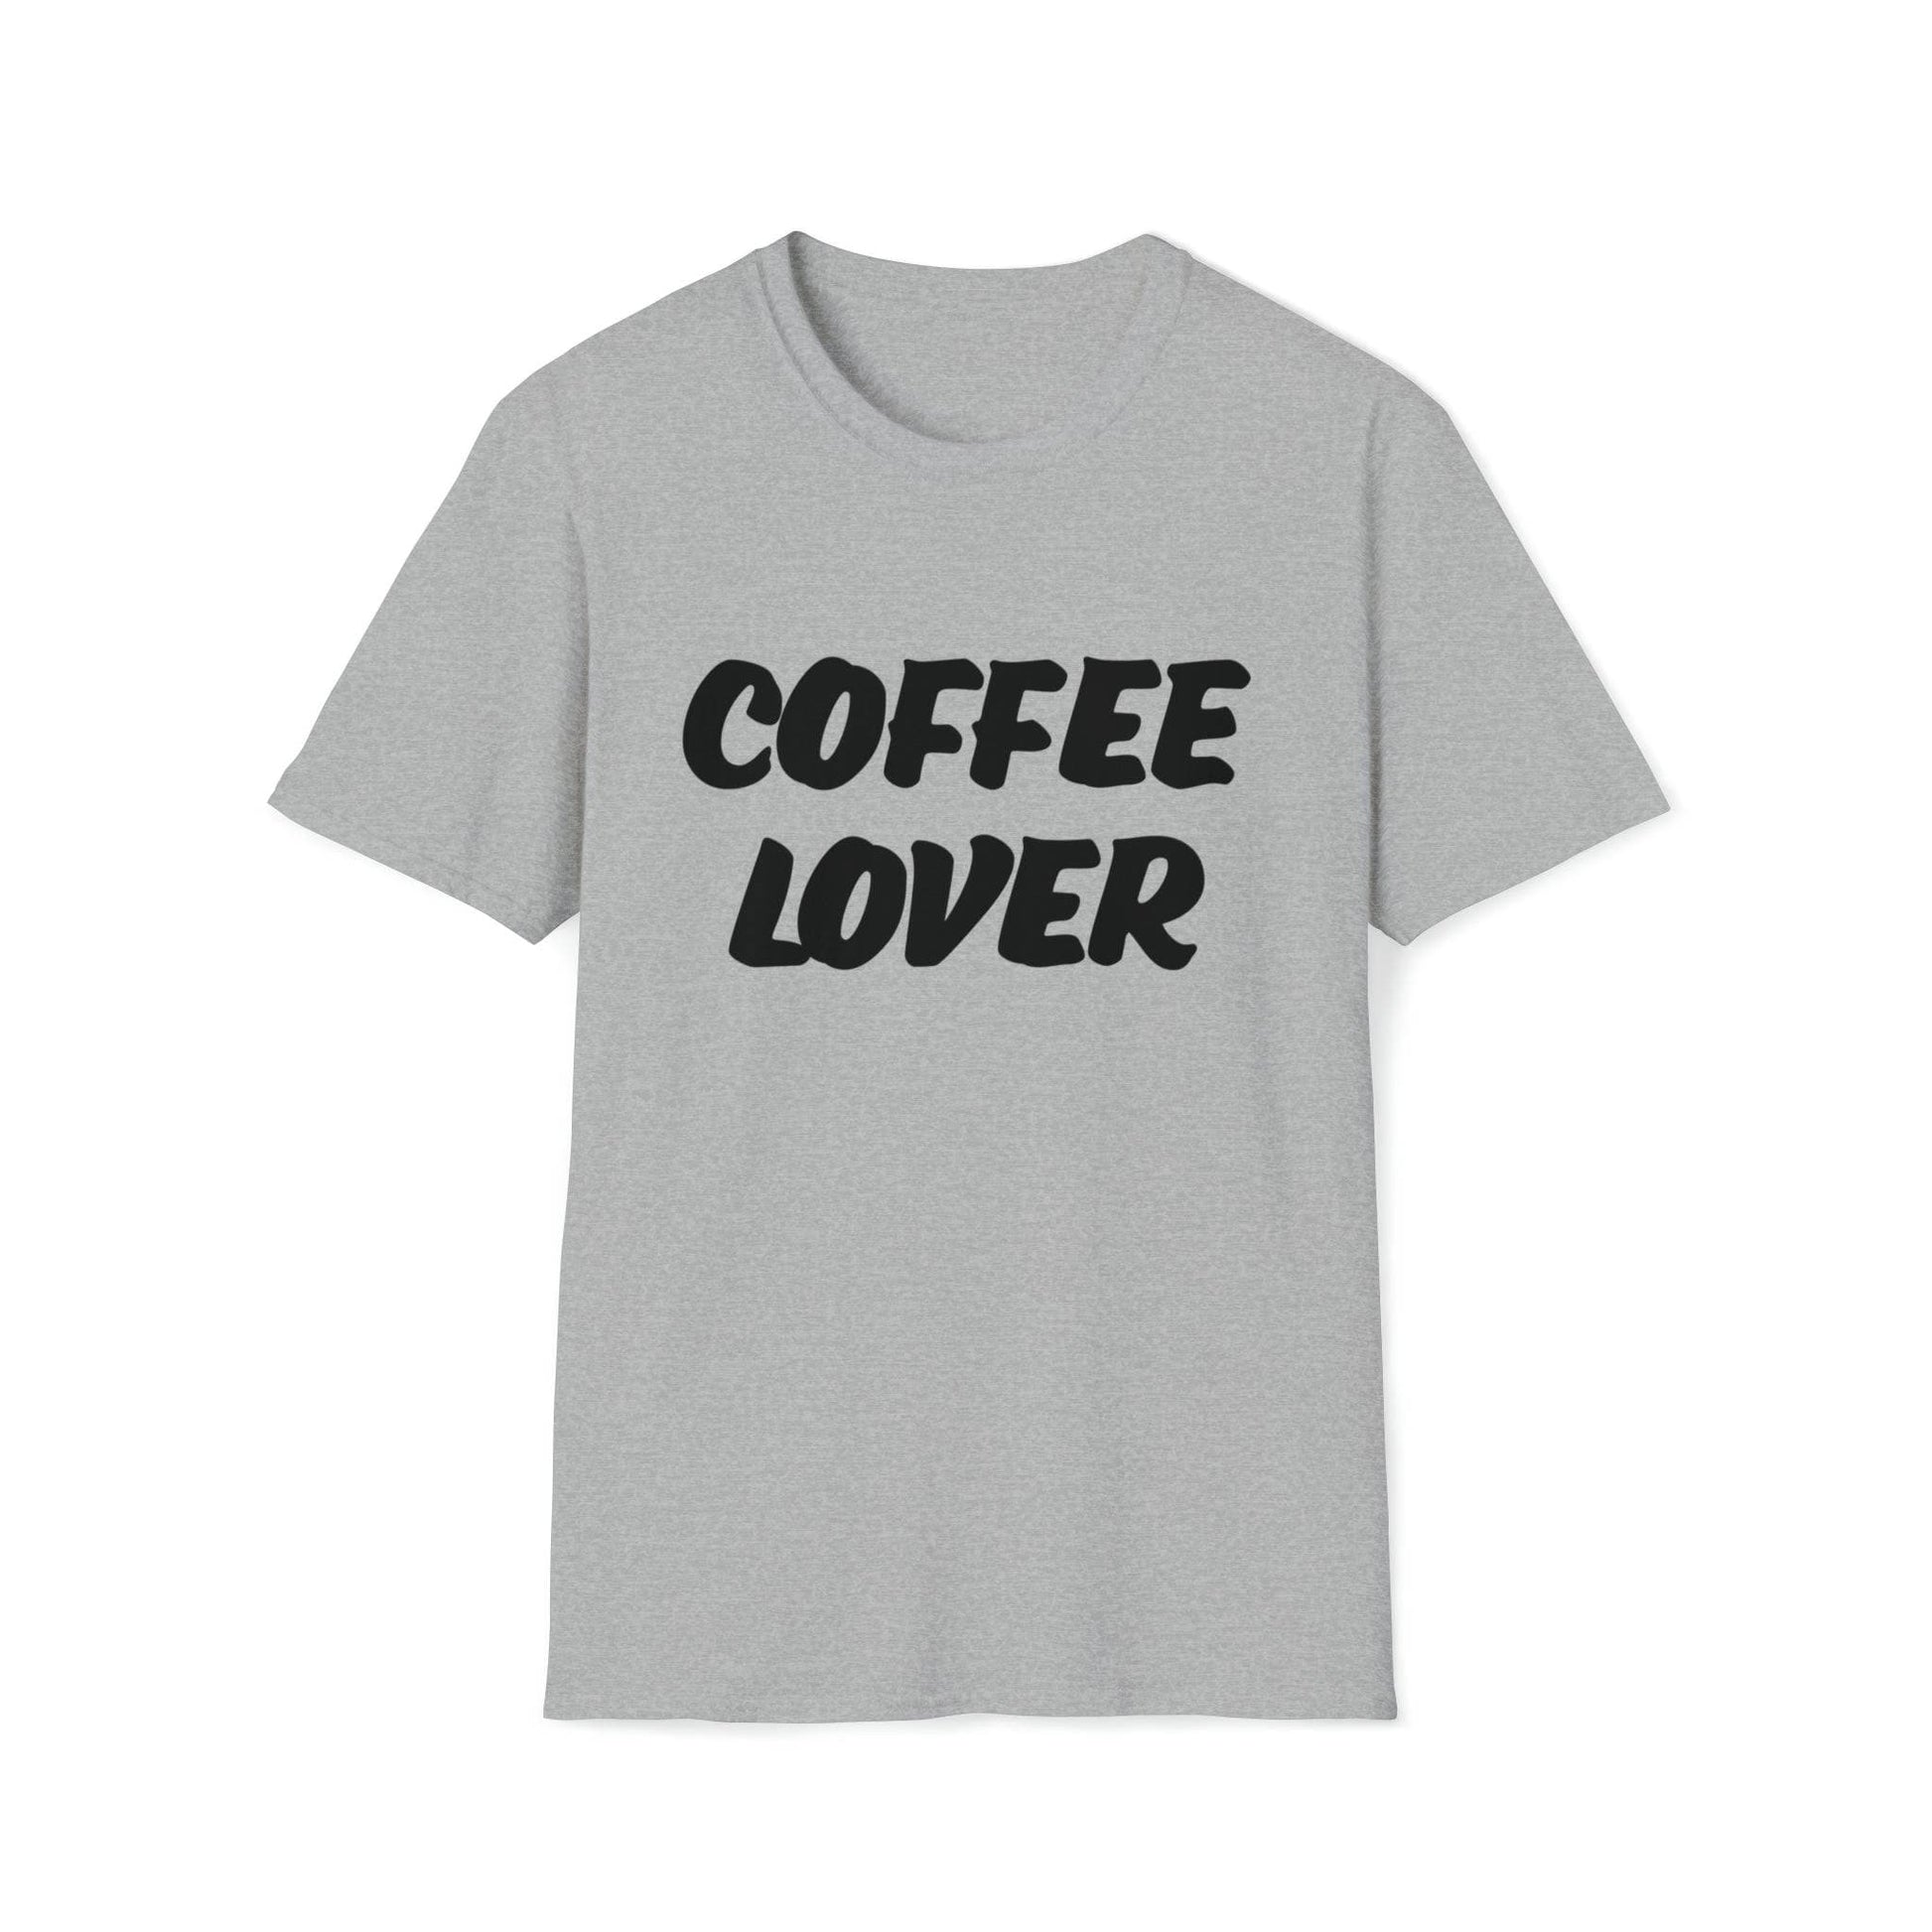 On Pointe Coffee Unisex Softstyle T-Shirt - On Pointe Coffee